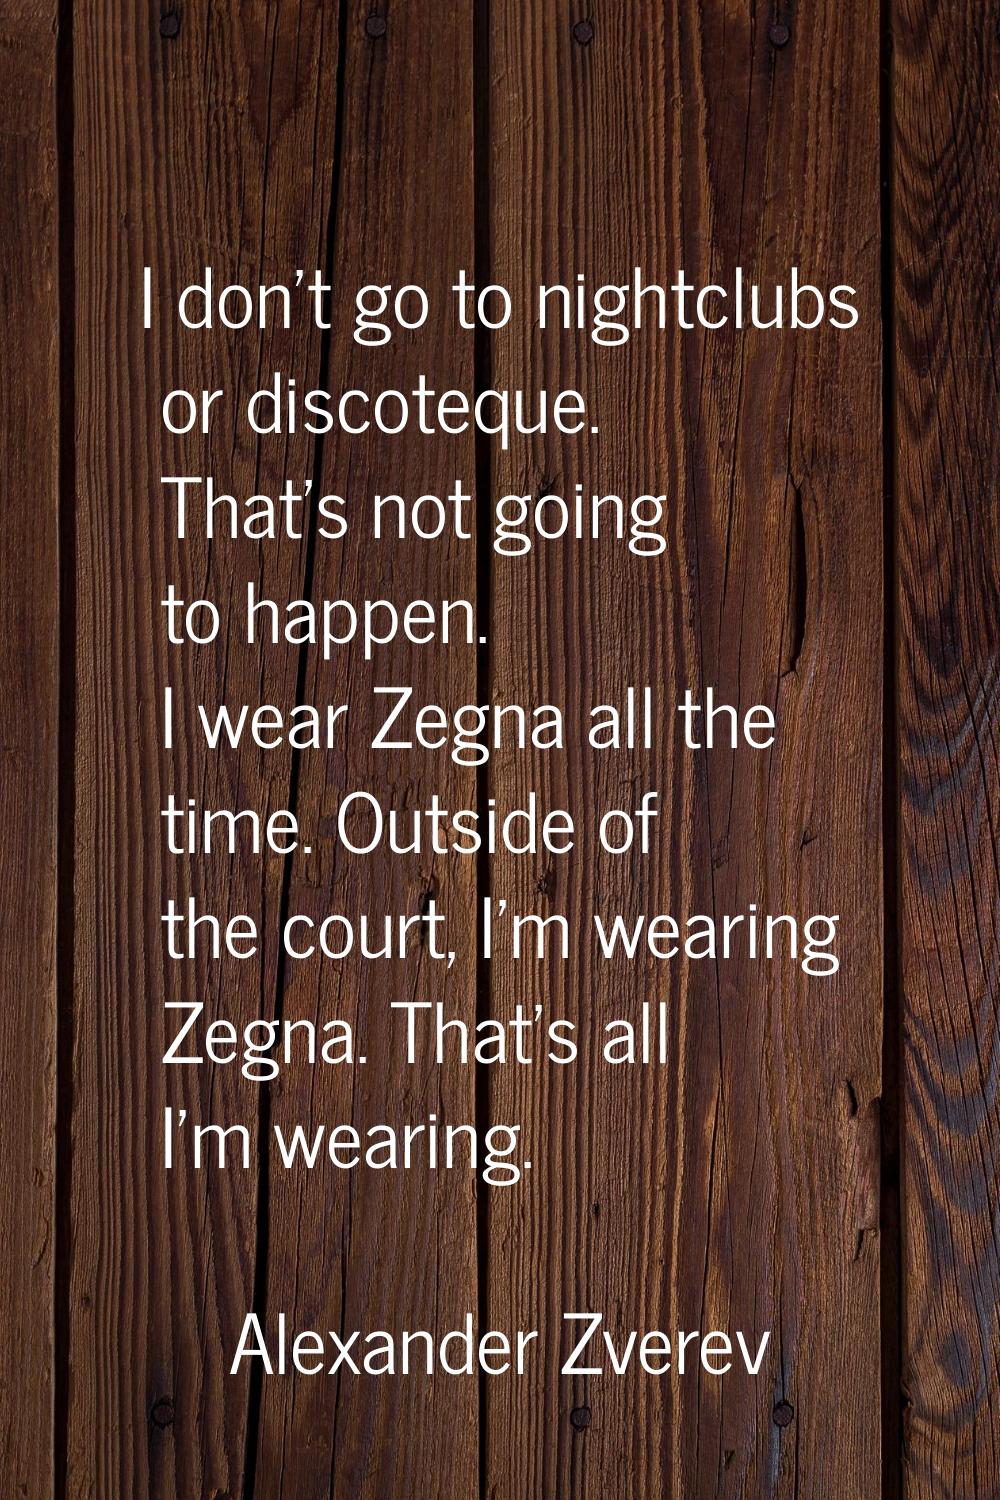 I don't go to nightclubs or discoteque. That's not going to happen. I wear Zegna all the time. Outs